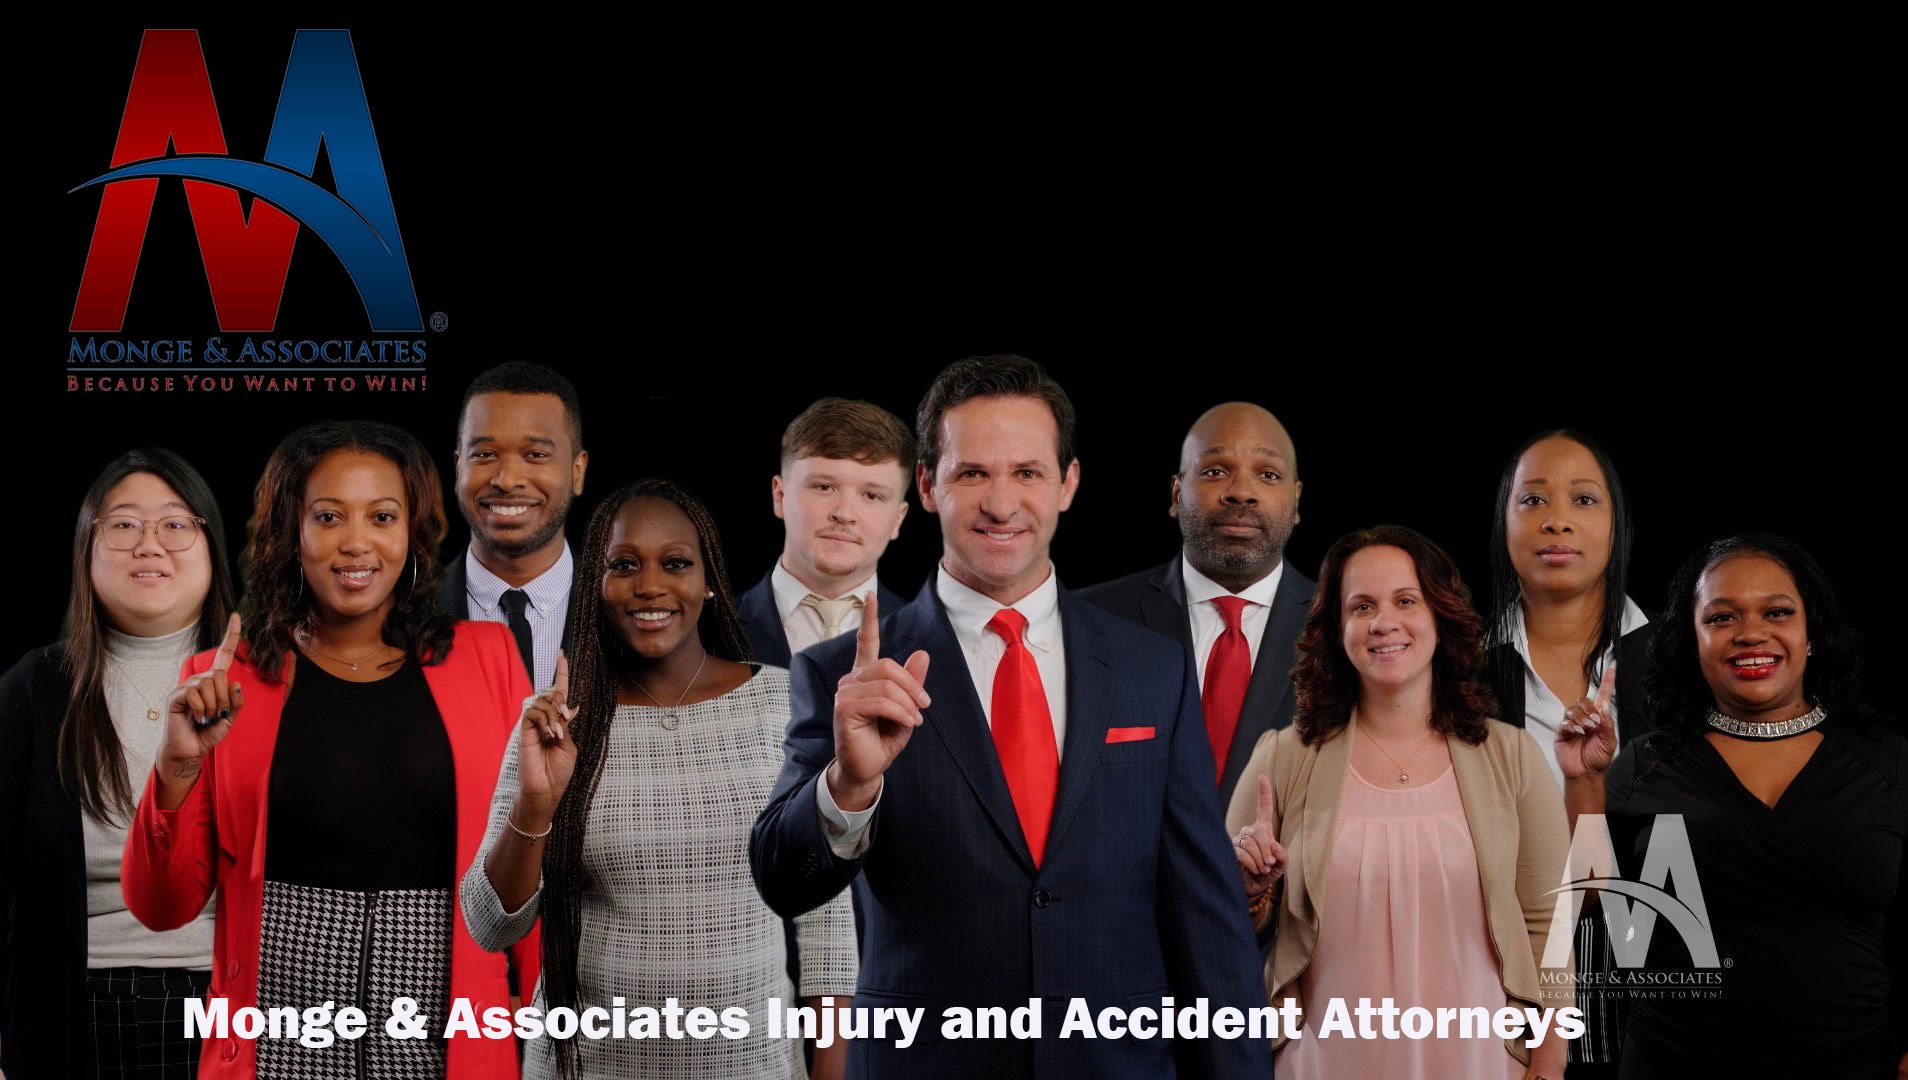 Monge Associates Injury and Accident Attorneys - Omaha, NE, US, personal injury law